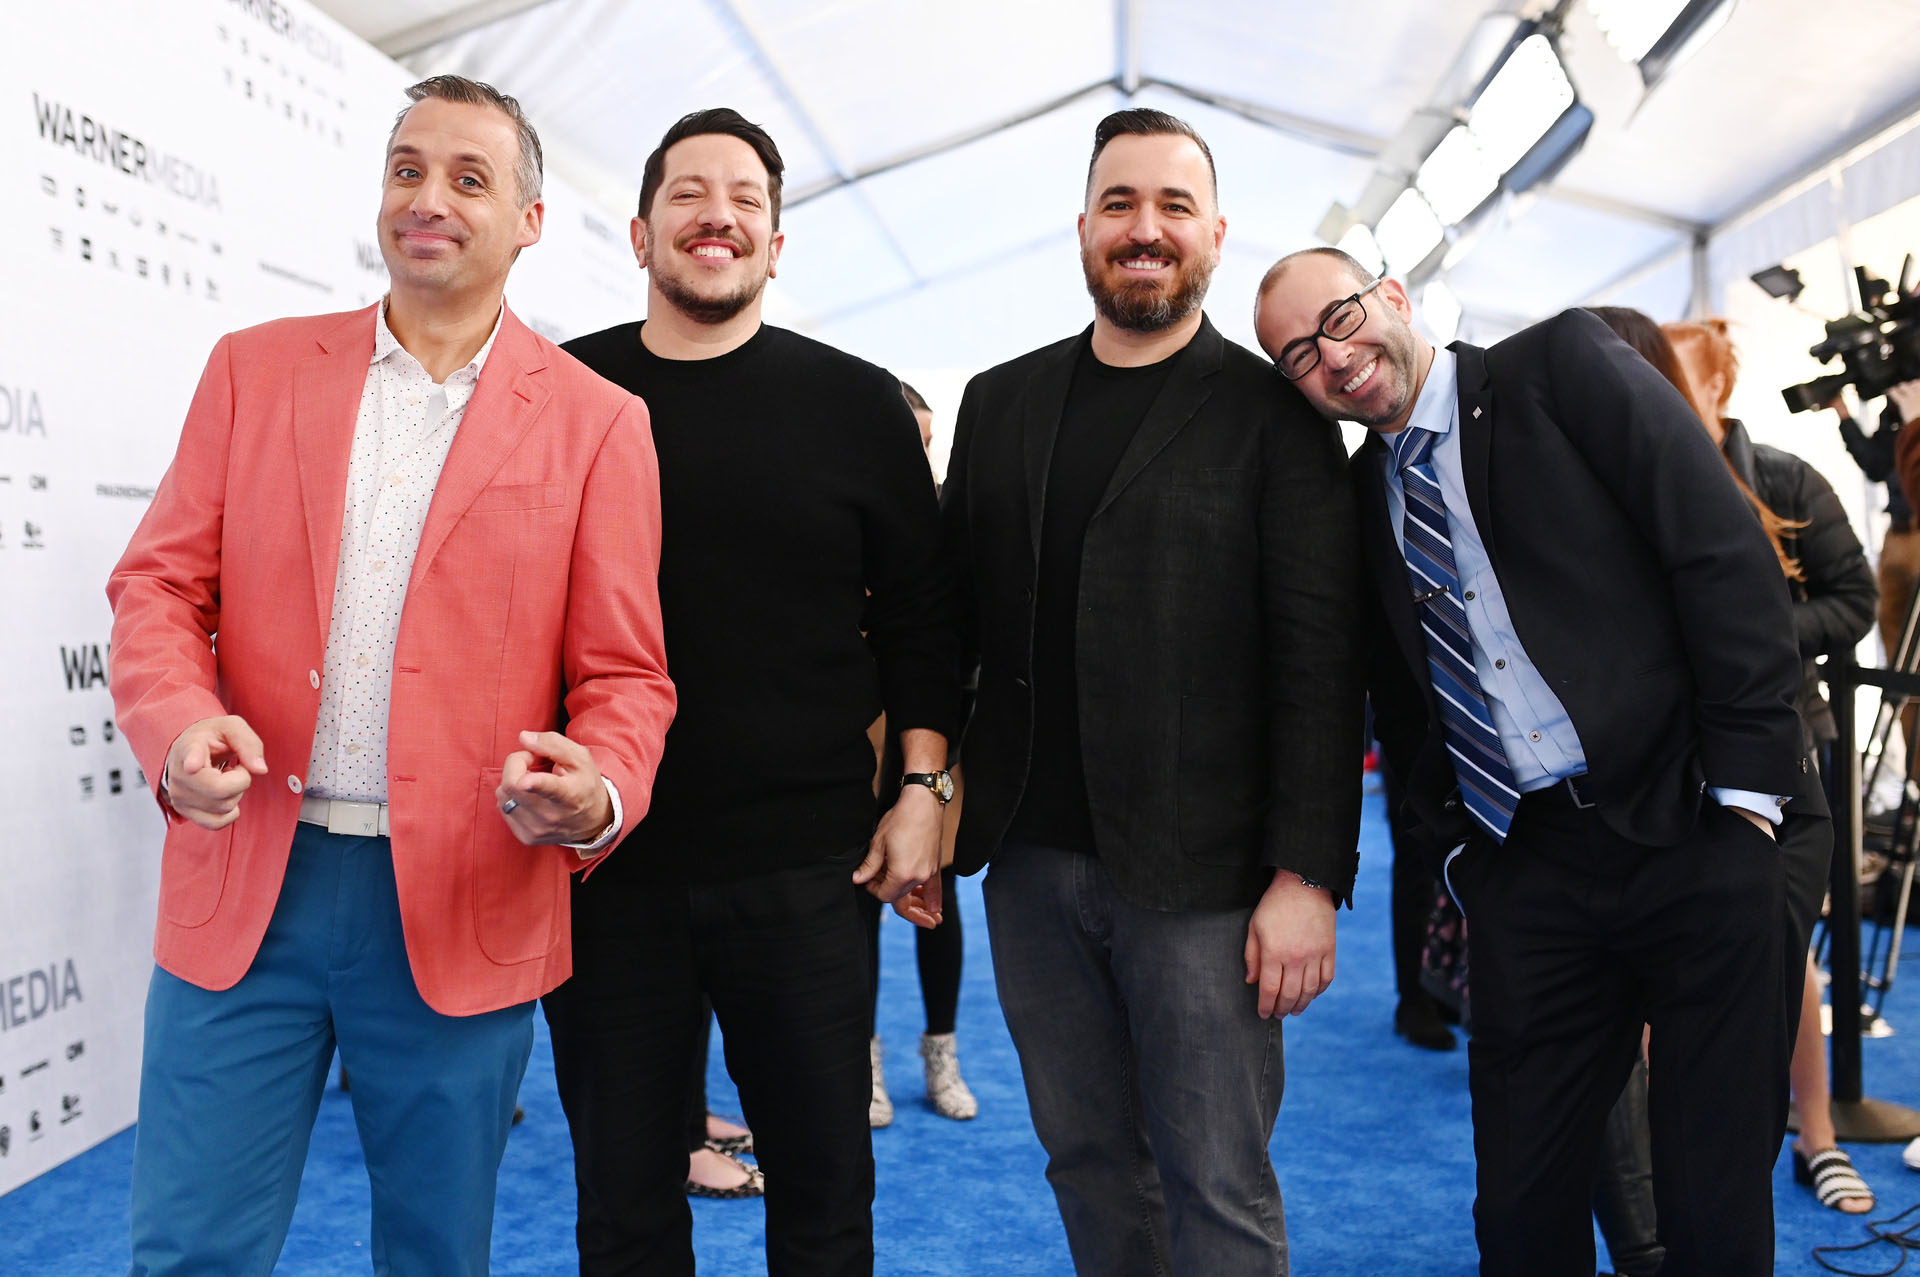 Photos REVIEW '(Impractical) Jokers' Movie Is Imperfect but Amusing